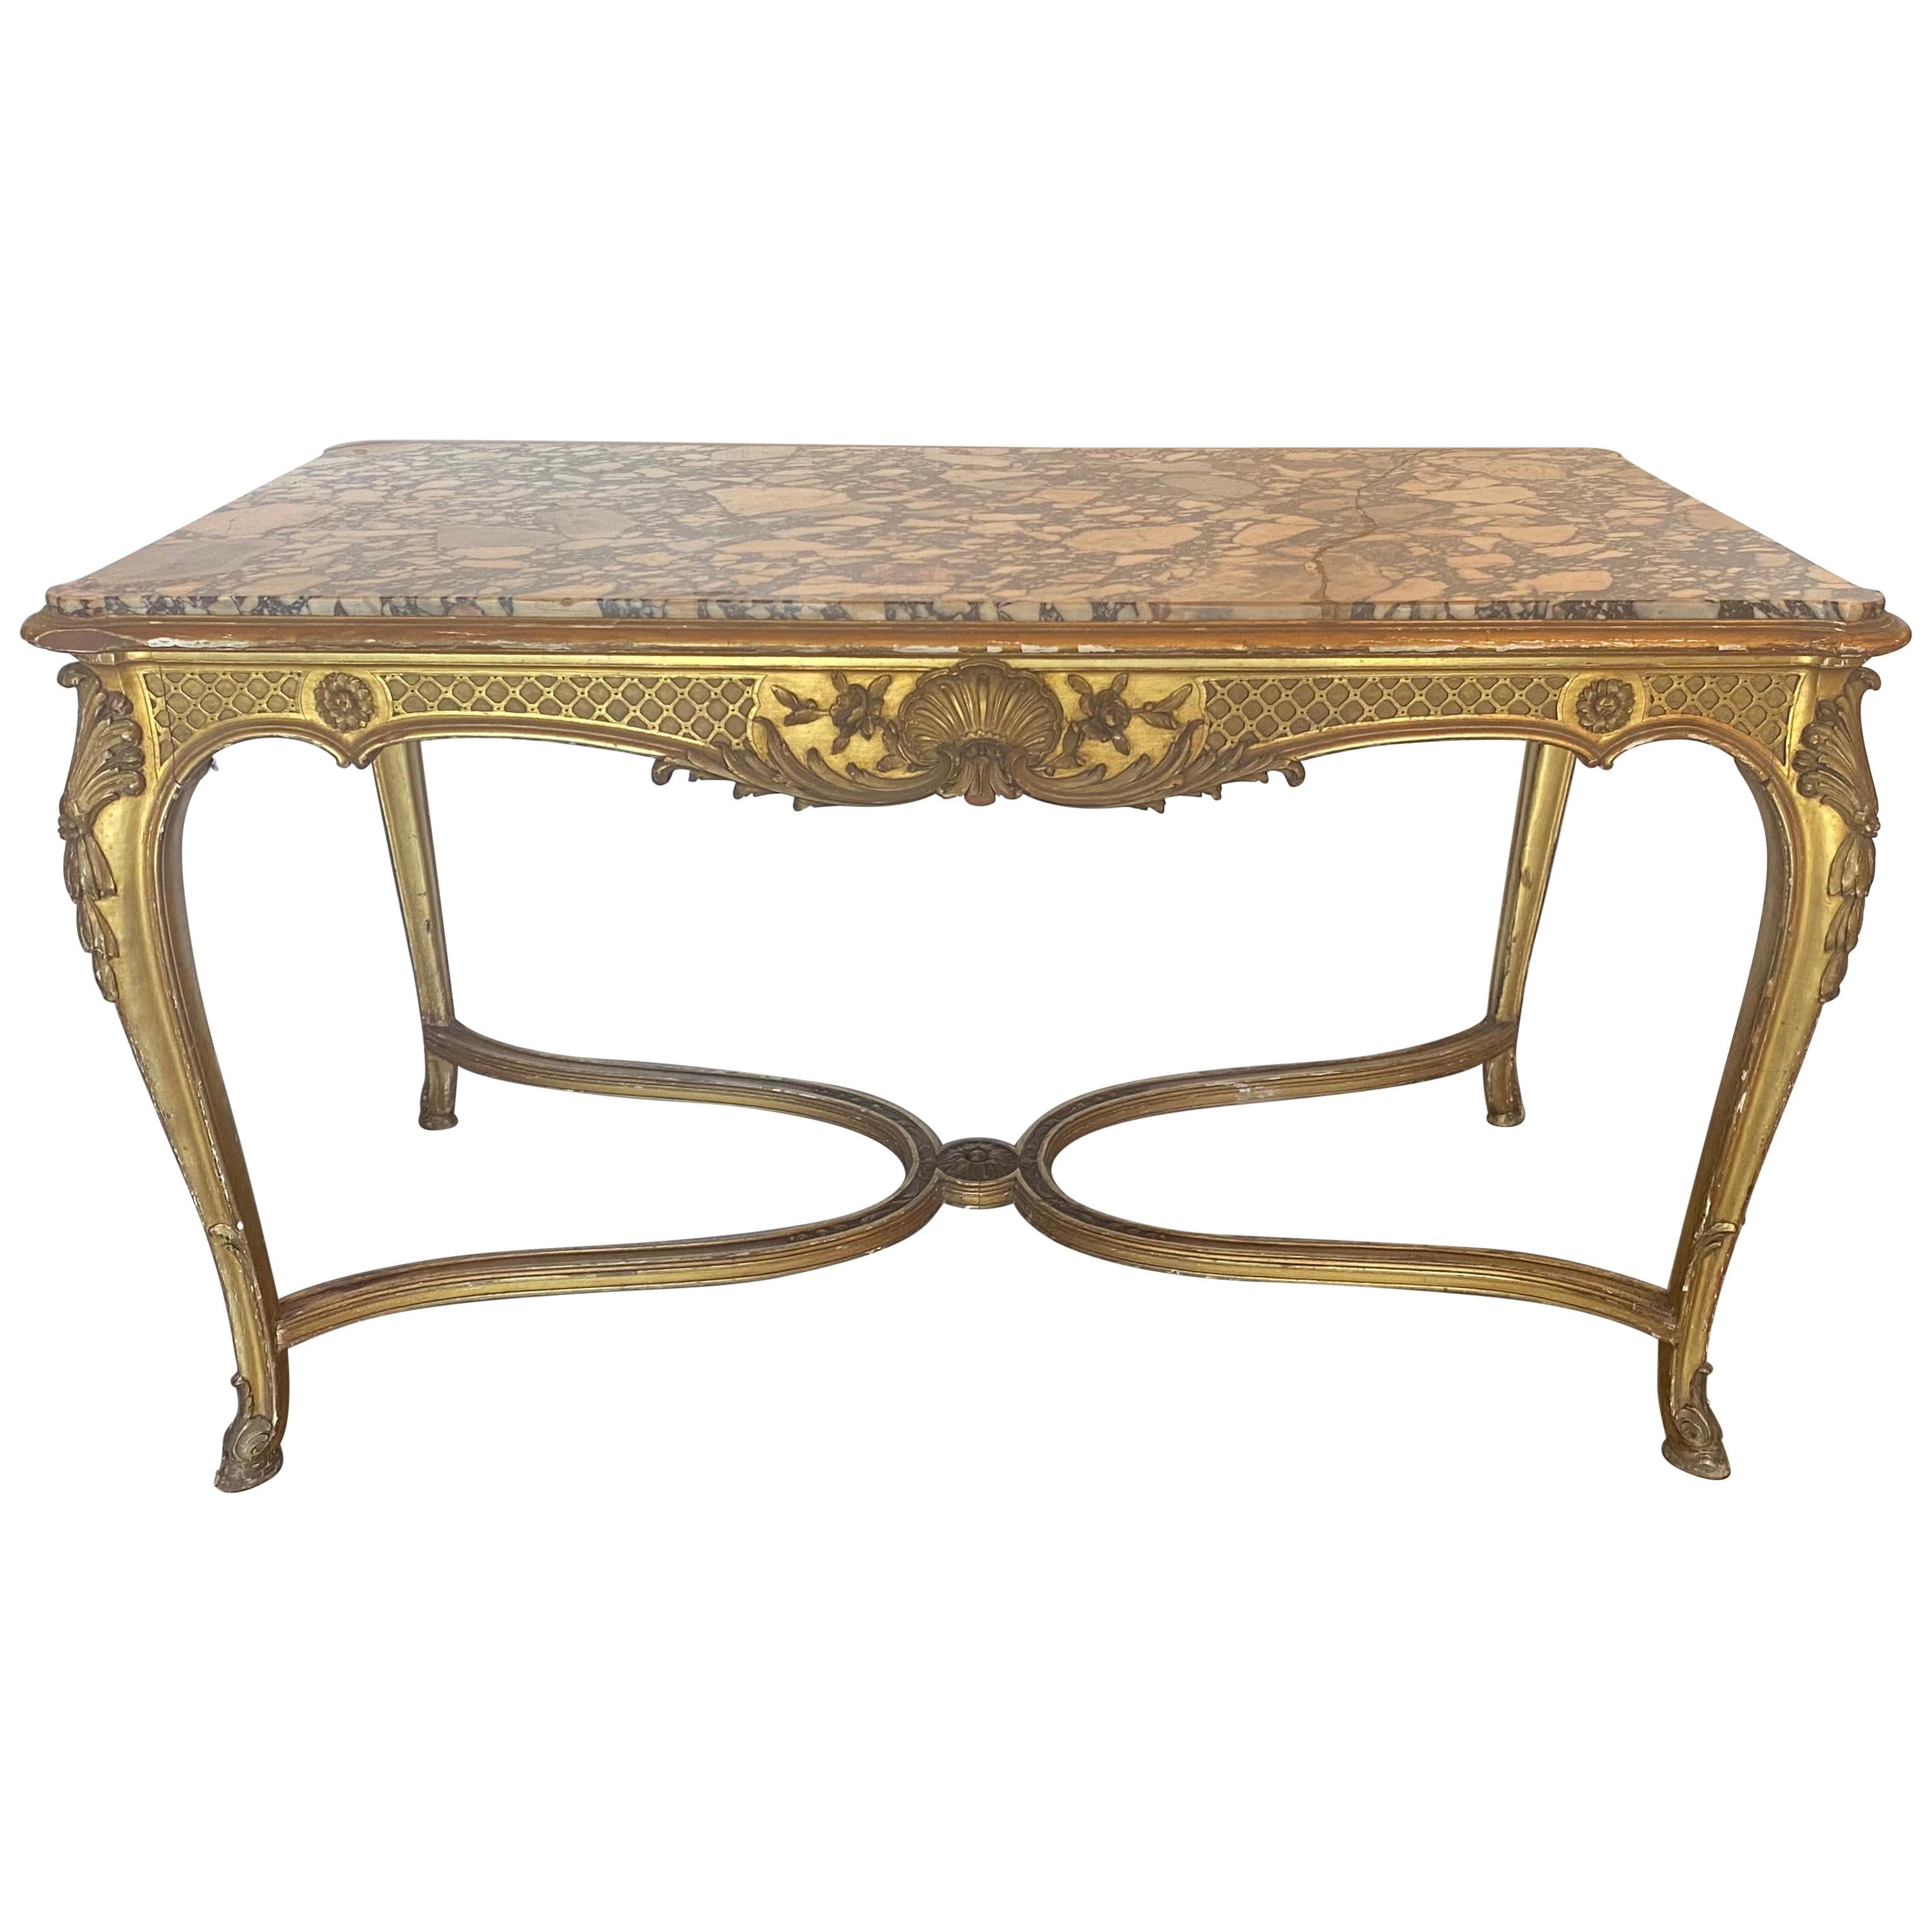 Exceptional Louis XV Style Marble-Top Gilt Table